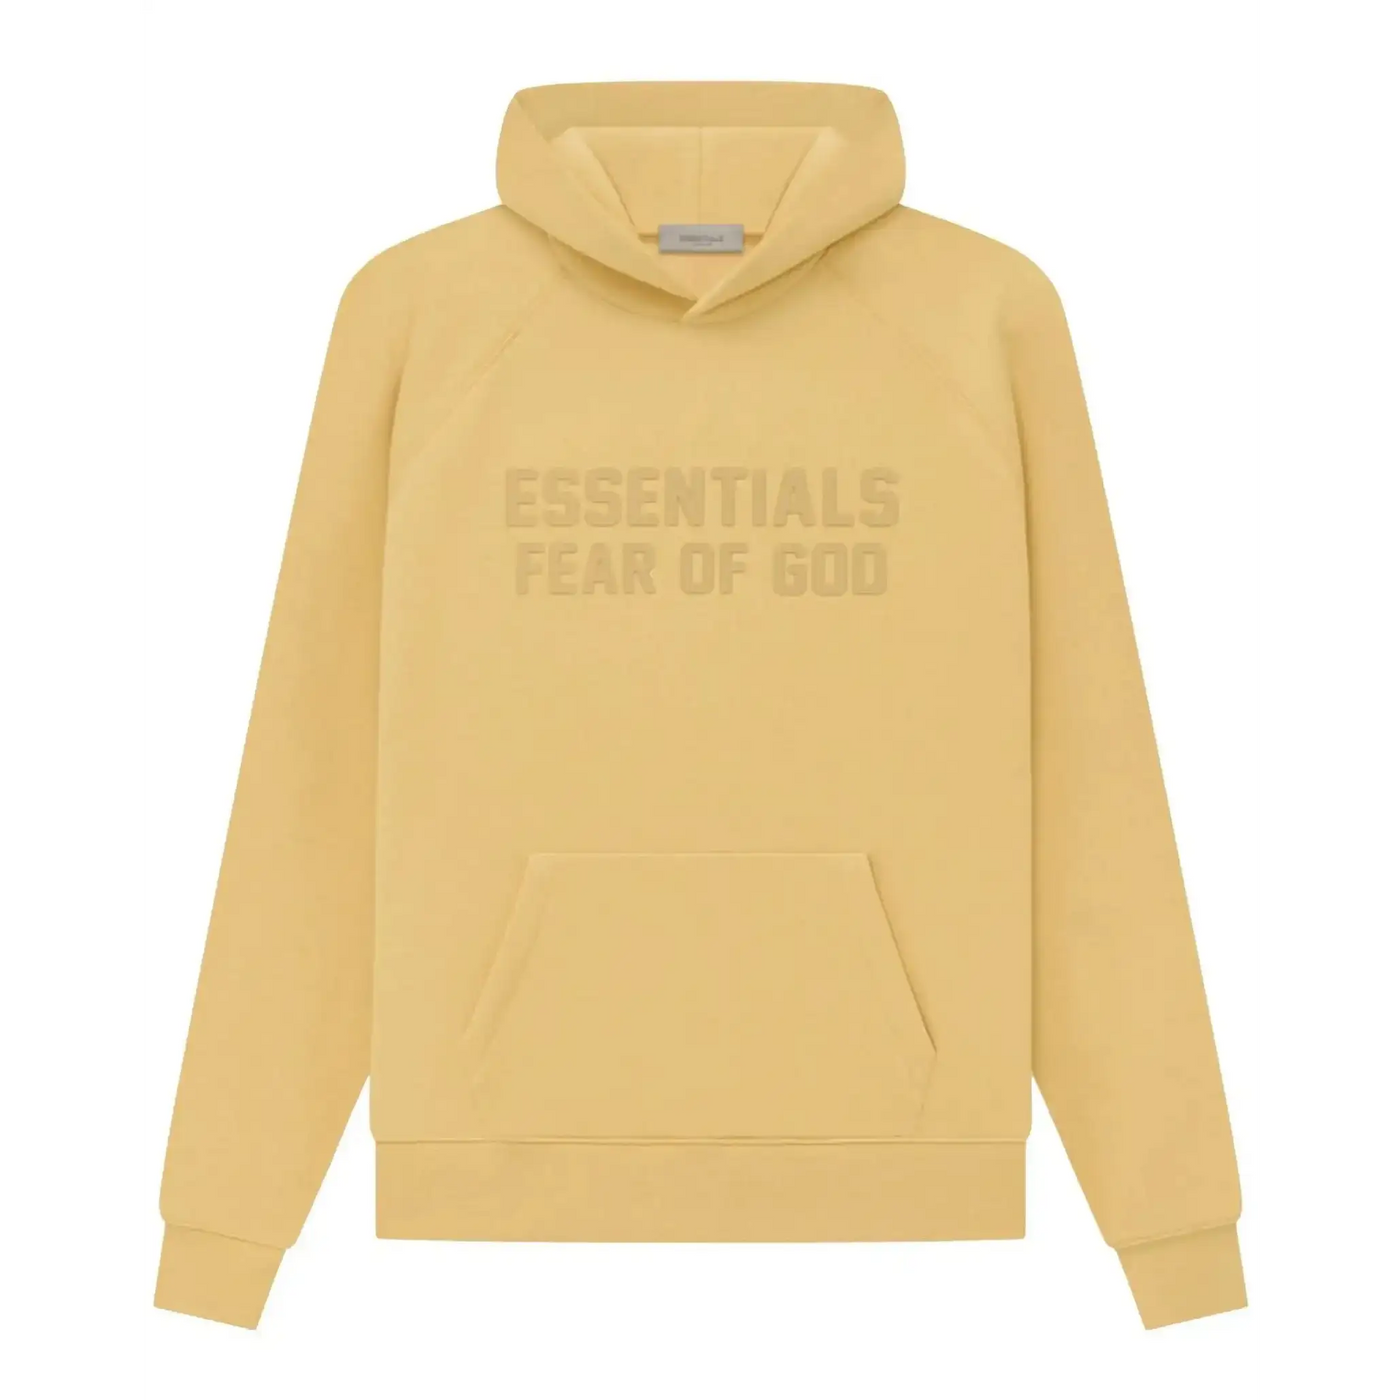 FEAR OF GOD SS23 HOODIE LIGHT TUSCAN